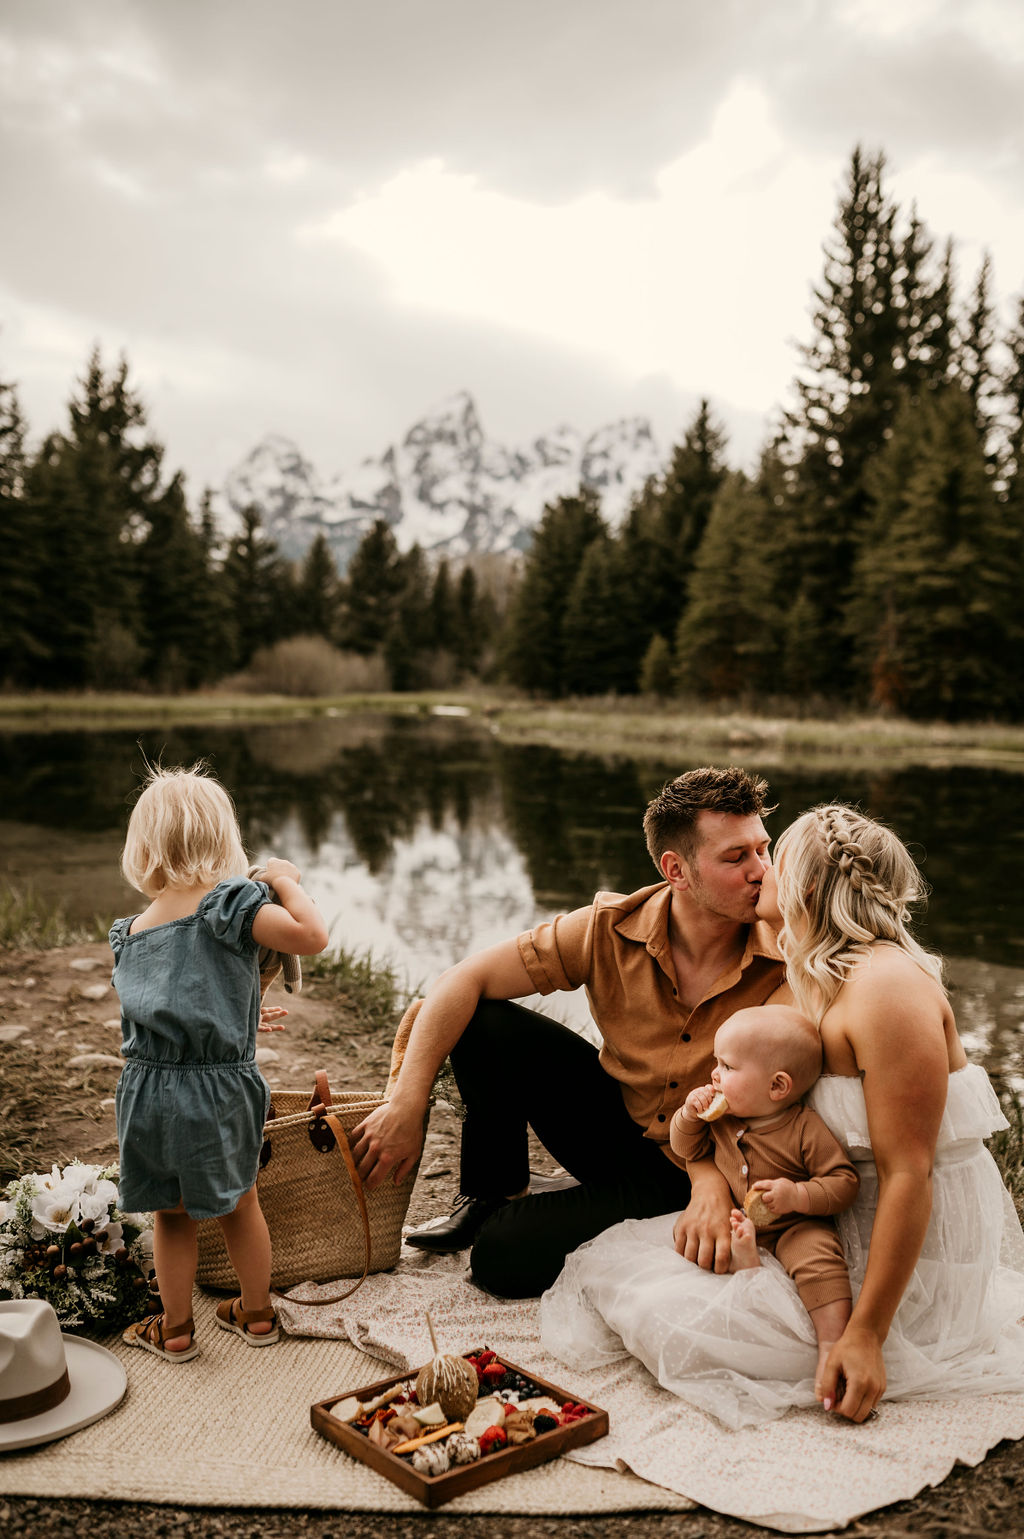 Elopement Ideas With Kids